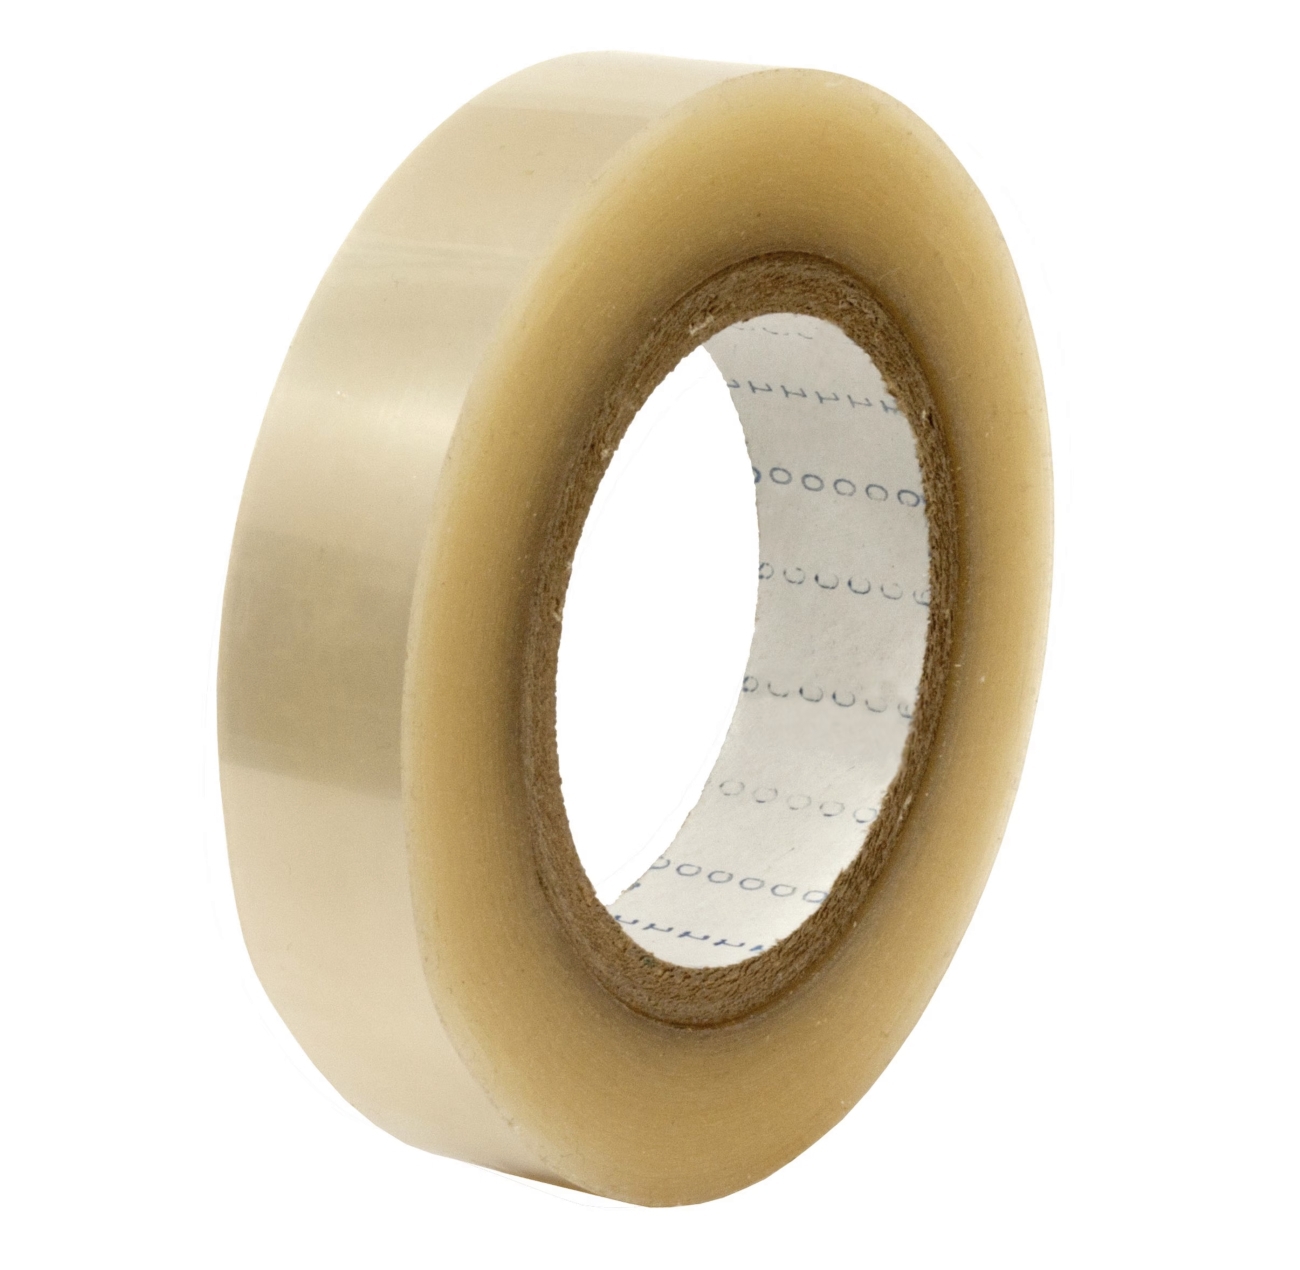 S-K-S dubbelzijdige kleefband met polyester drager 960, transparant, 19 mm x 66 m, siliconen kleefband, 0,085 mm